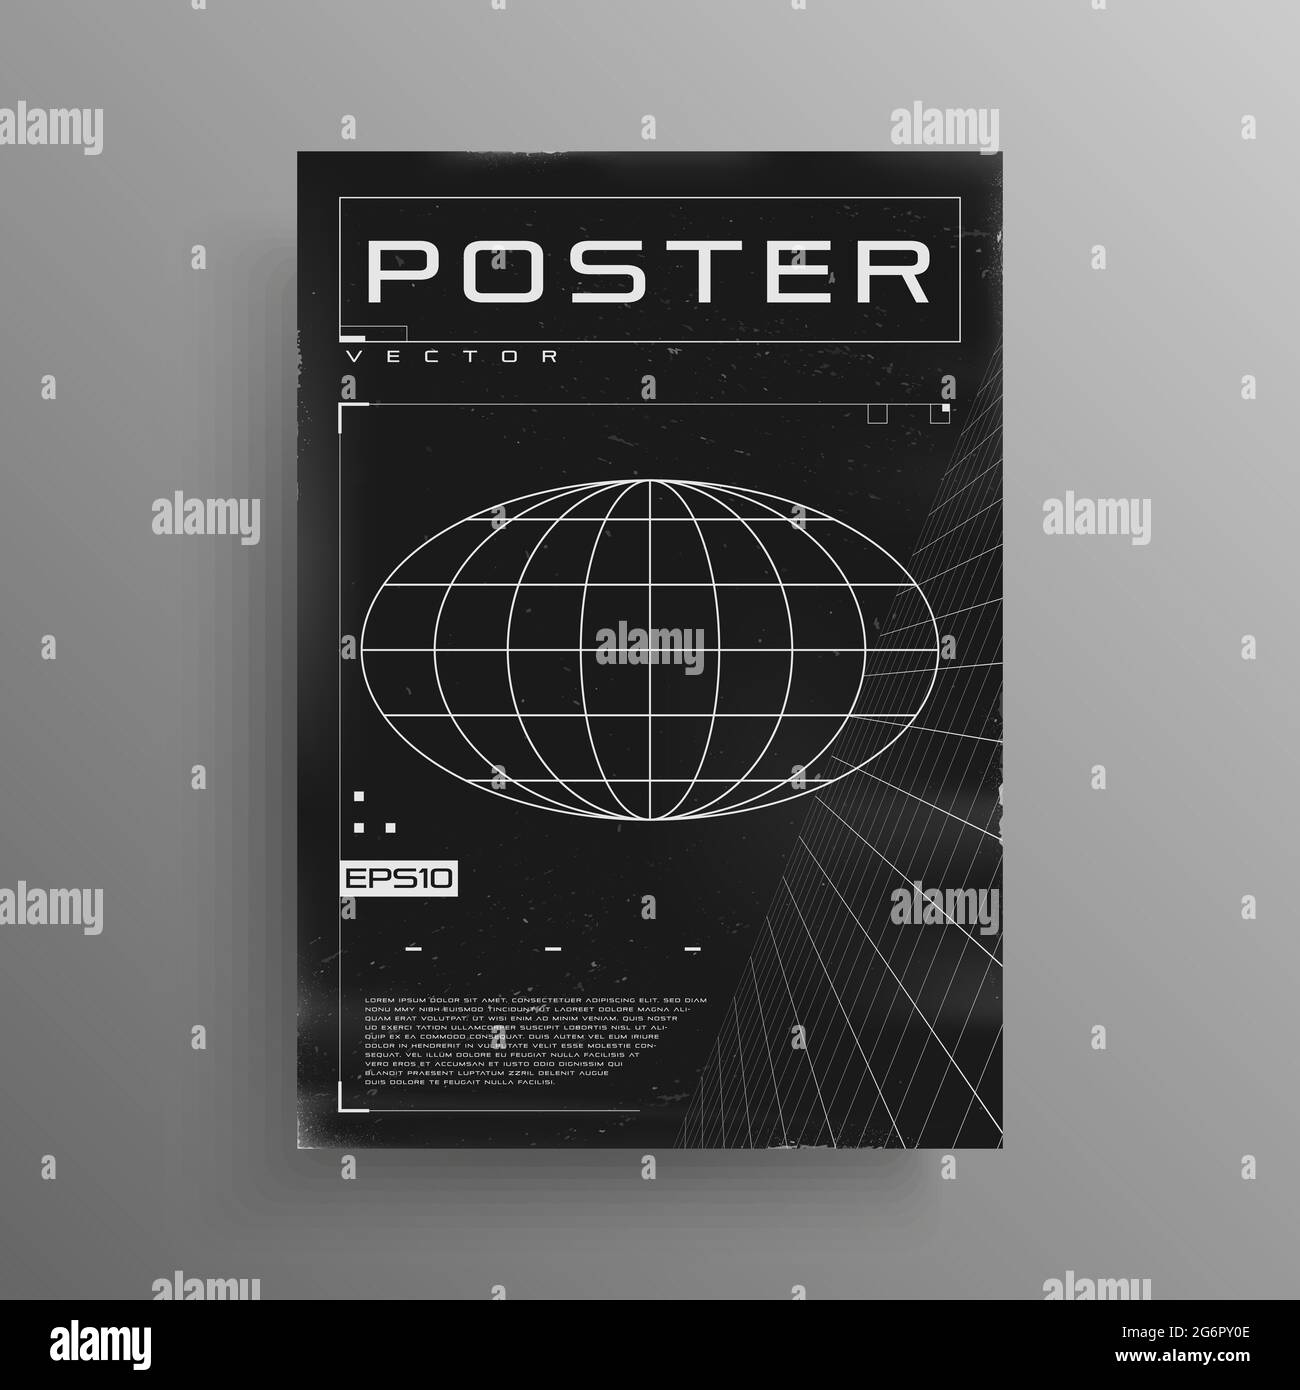 Retrofuturistic poster design with ellipse planet and perspective grid. Retro cyberpunk poster with trendy cyber and HUD elements. Cover design for Stock Vector